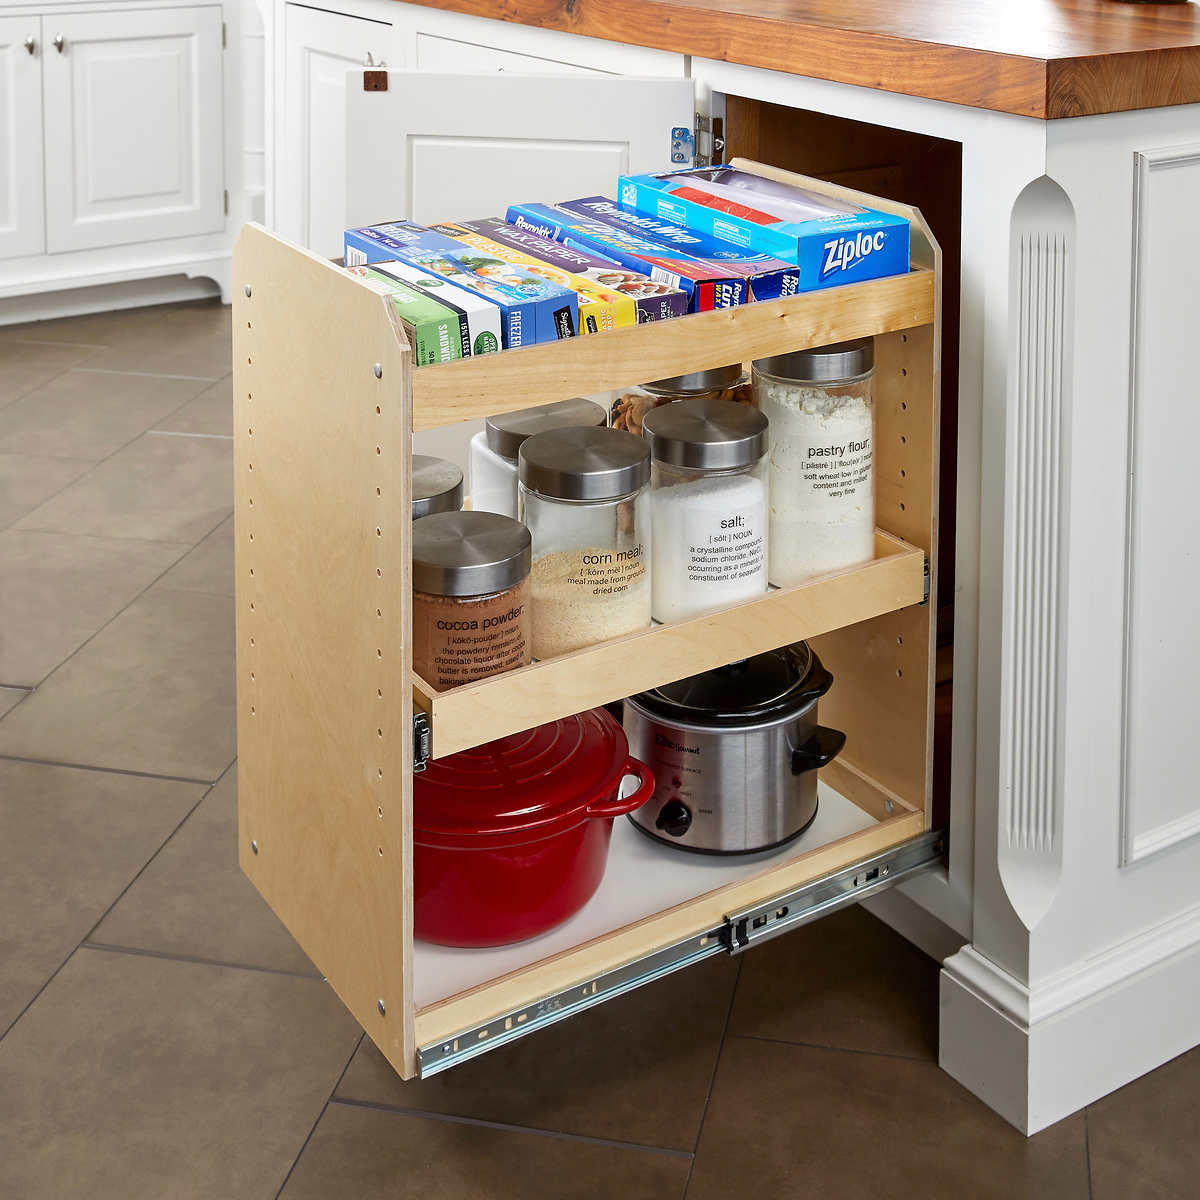 Made To Fit Slide Out Cabinet Organizers For Existing Cabinets By Slide A Shelf